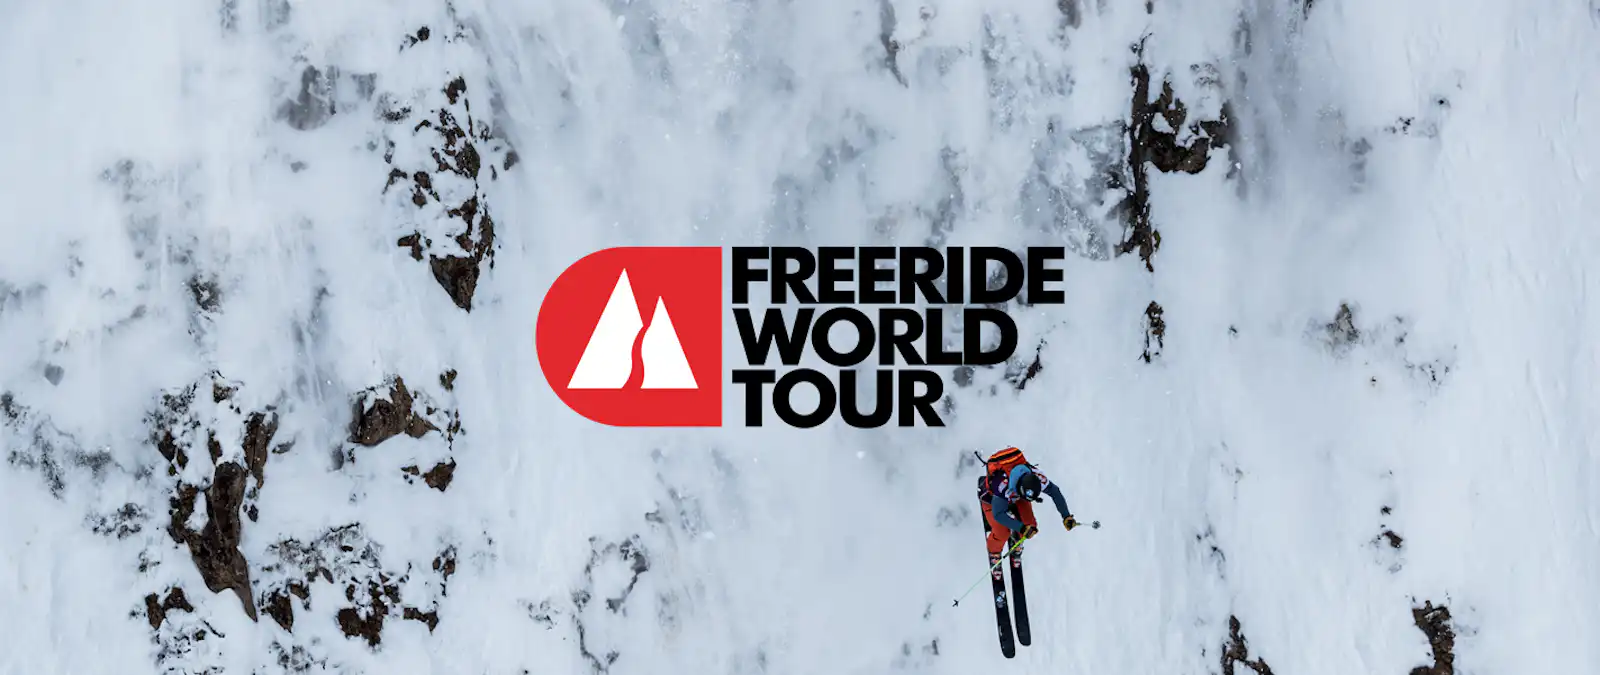 Freeride World Tour Partnership: Ride in Japan with a Pro Athlete post image